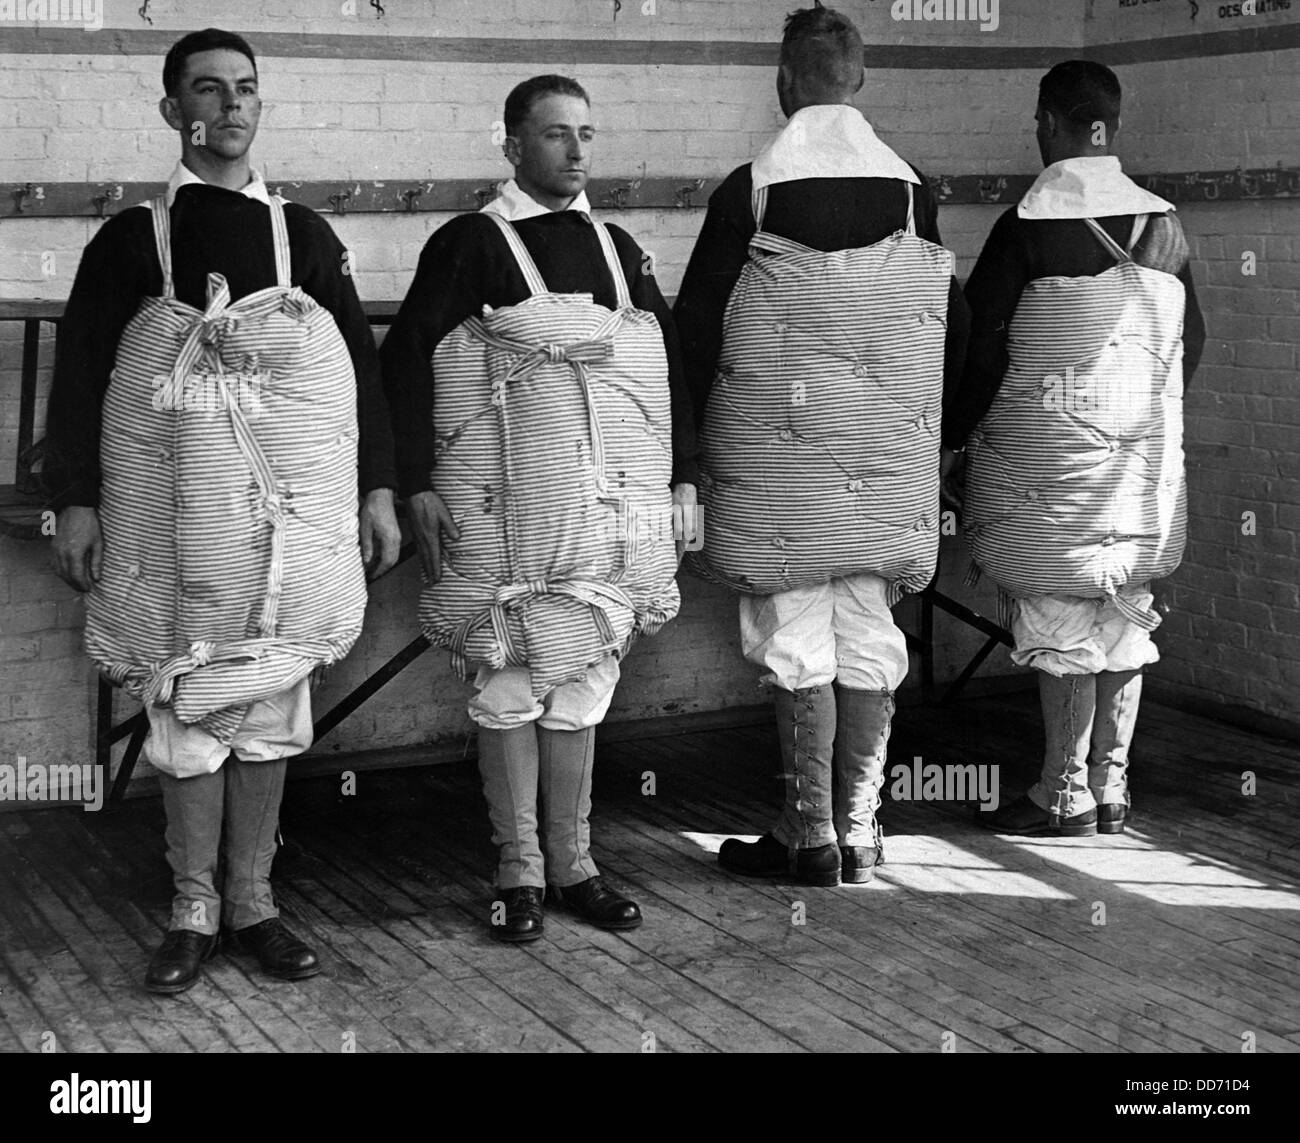 Navy recruits with their mattresses tied to them to serve as life preservers. Newport Naval Training Station, Rhode Island. Stock Photo